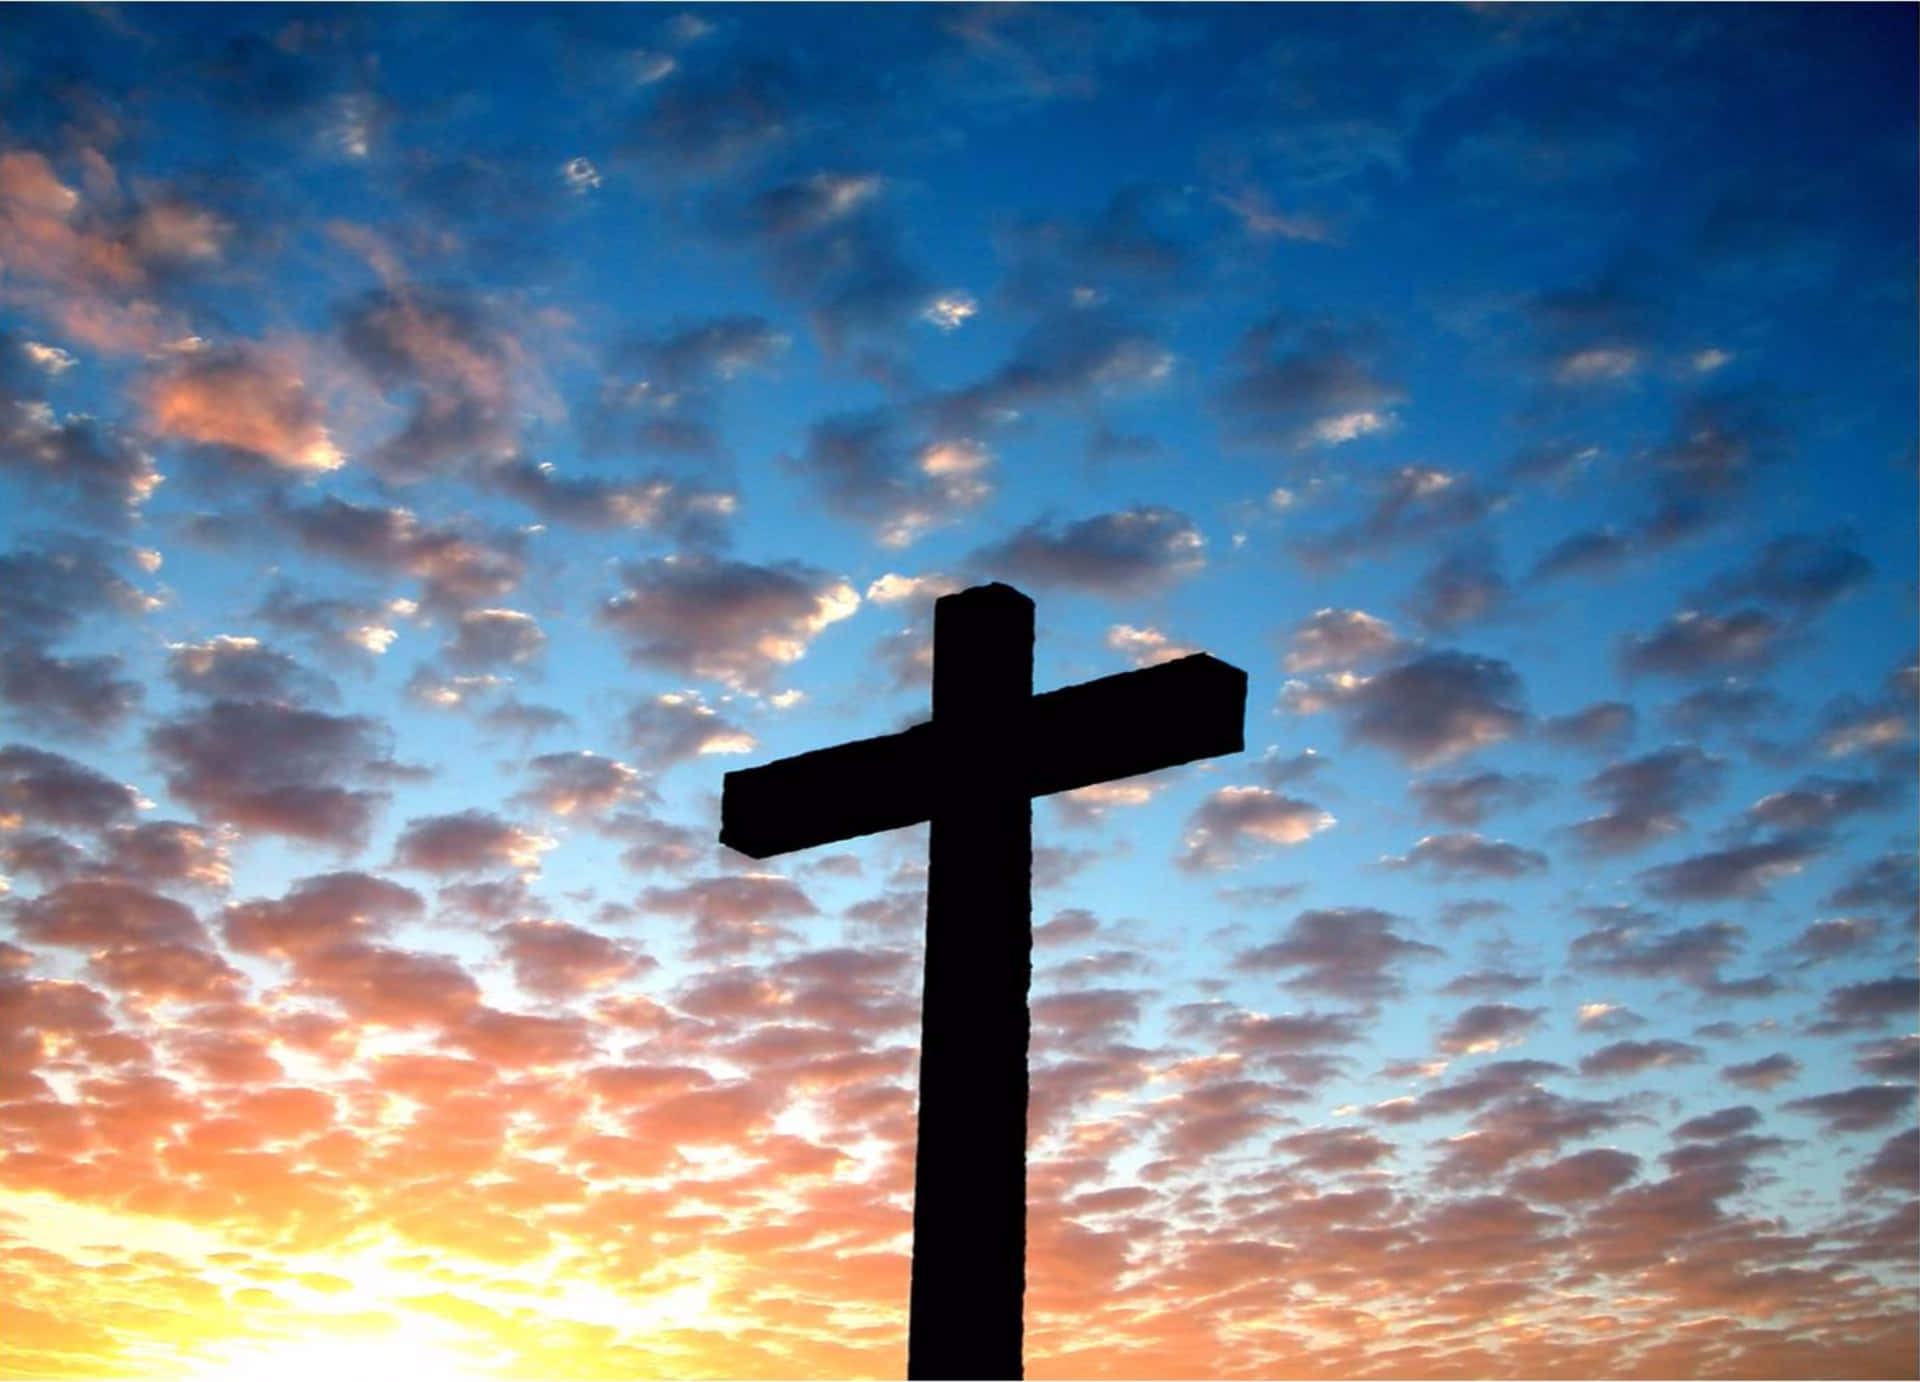 A Cross Is Silhouetted Against A Sunset Sky Background